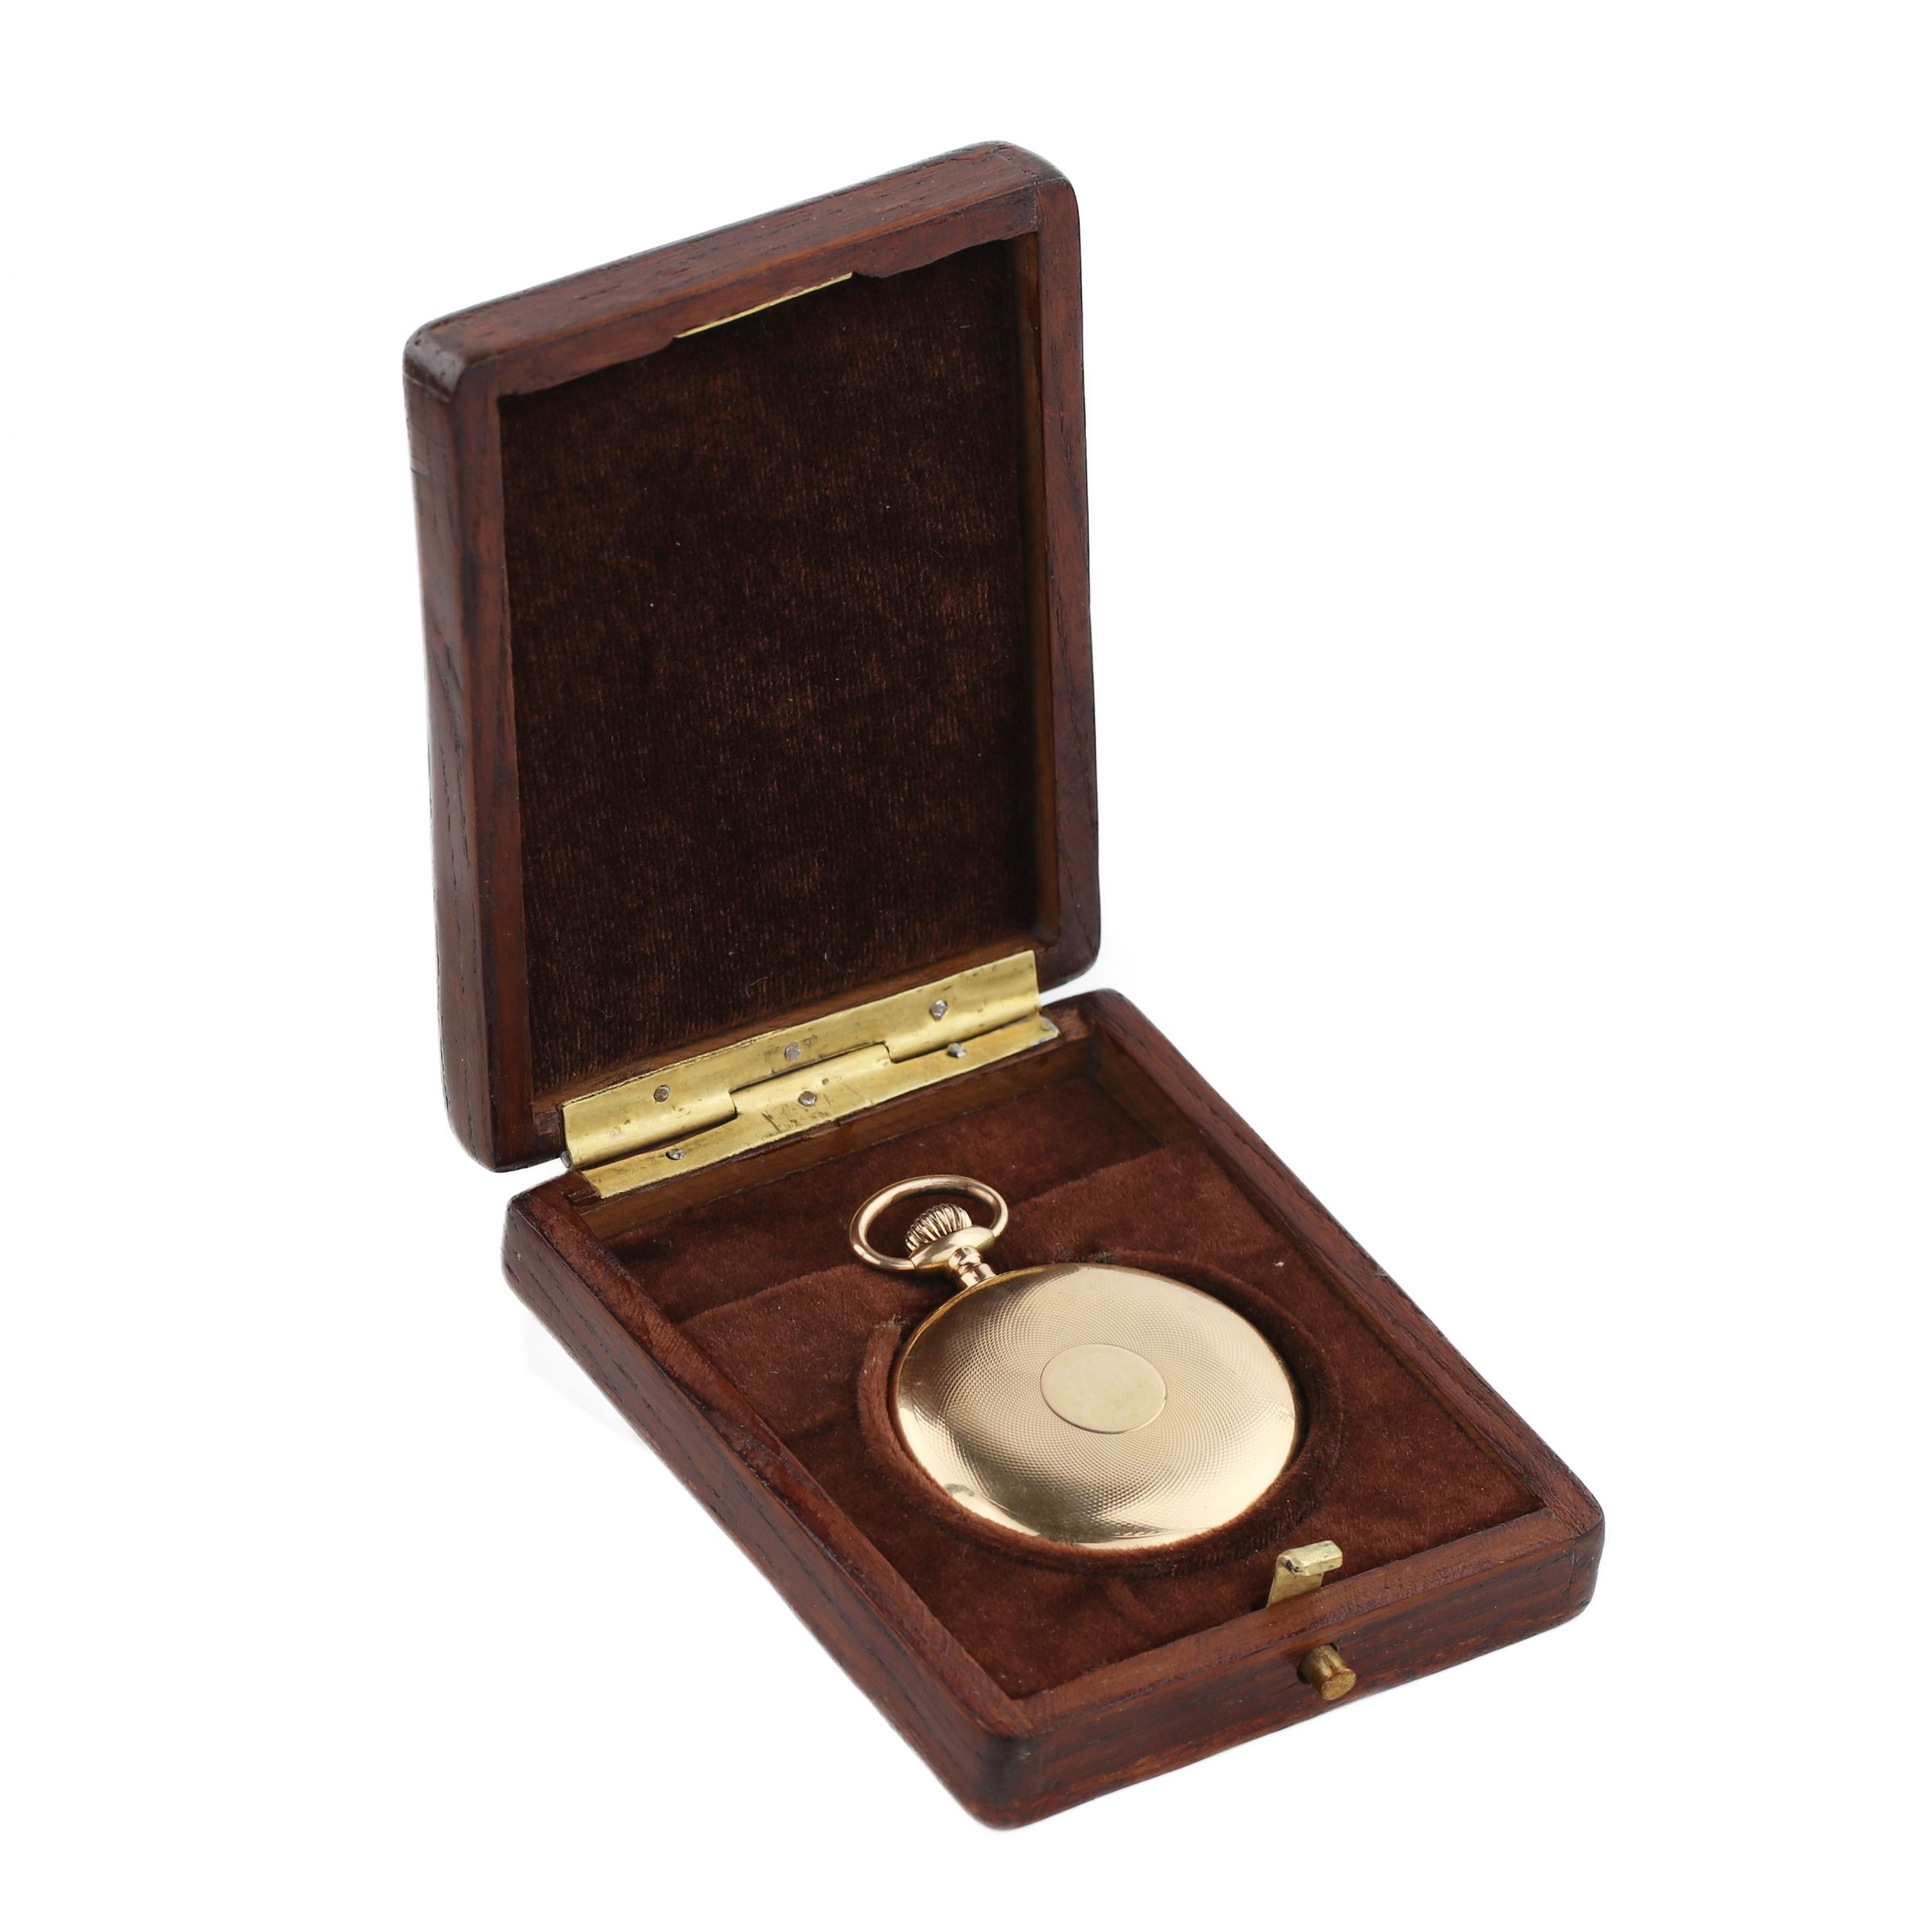 Russian, gold, pocket watch of the pre-revolutionary company F. Winter. - Image 10 of 10